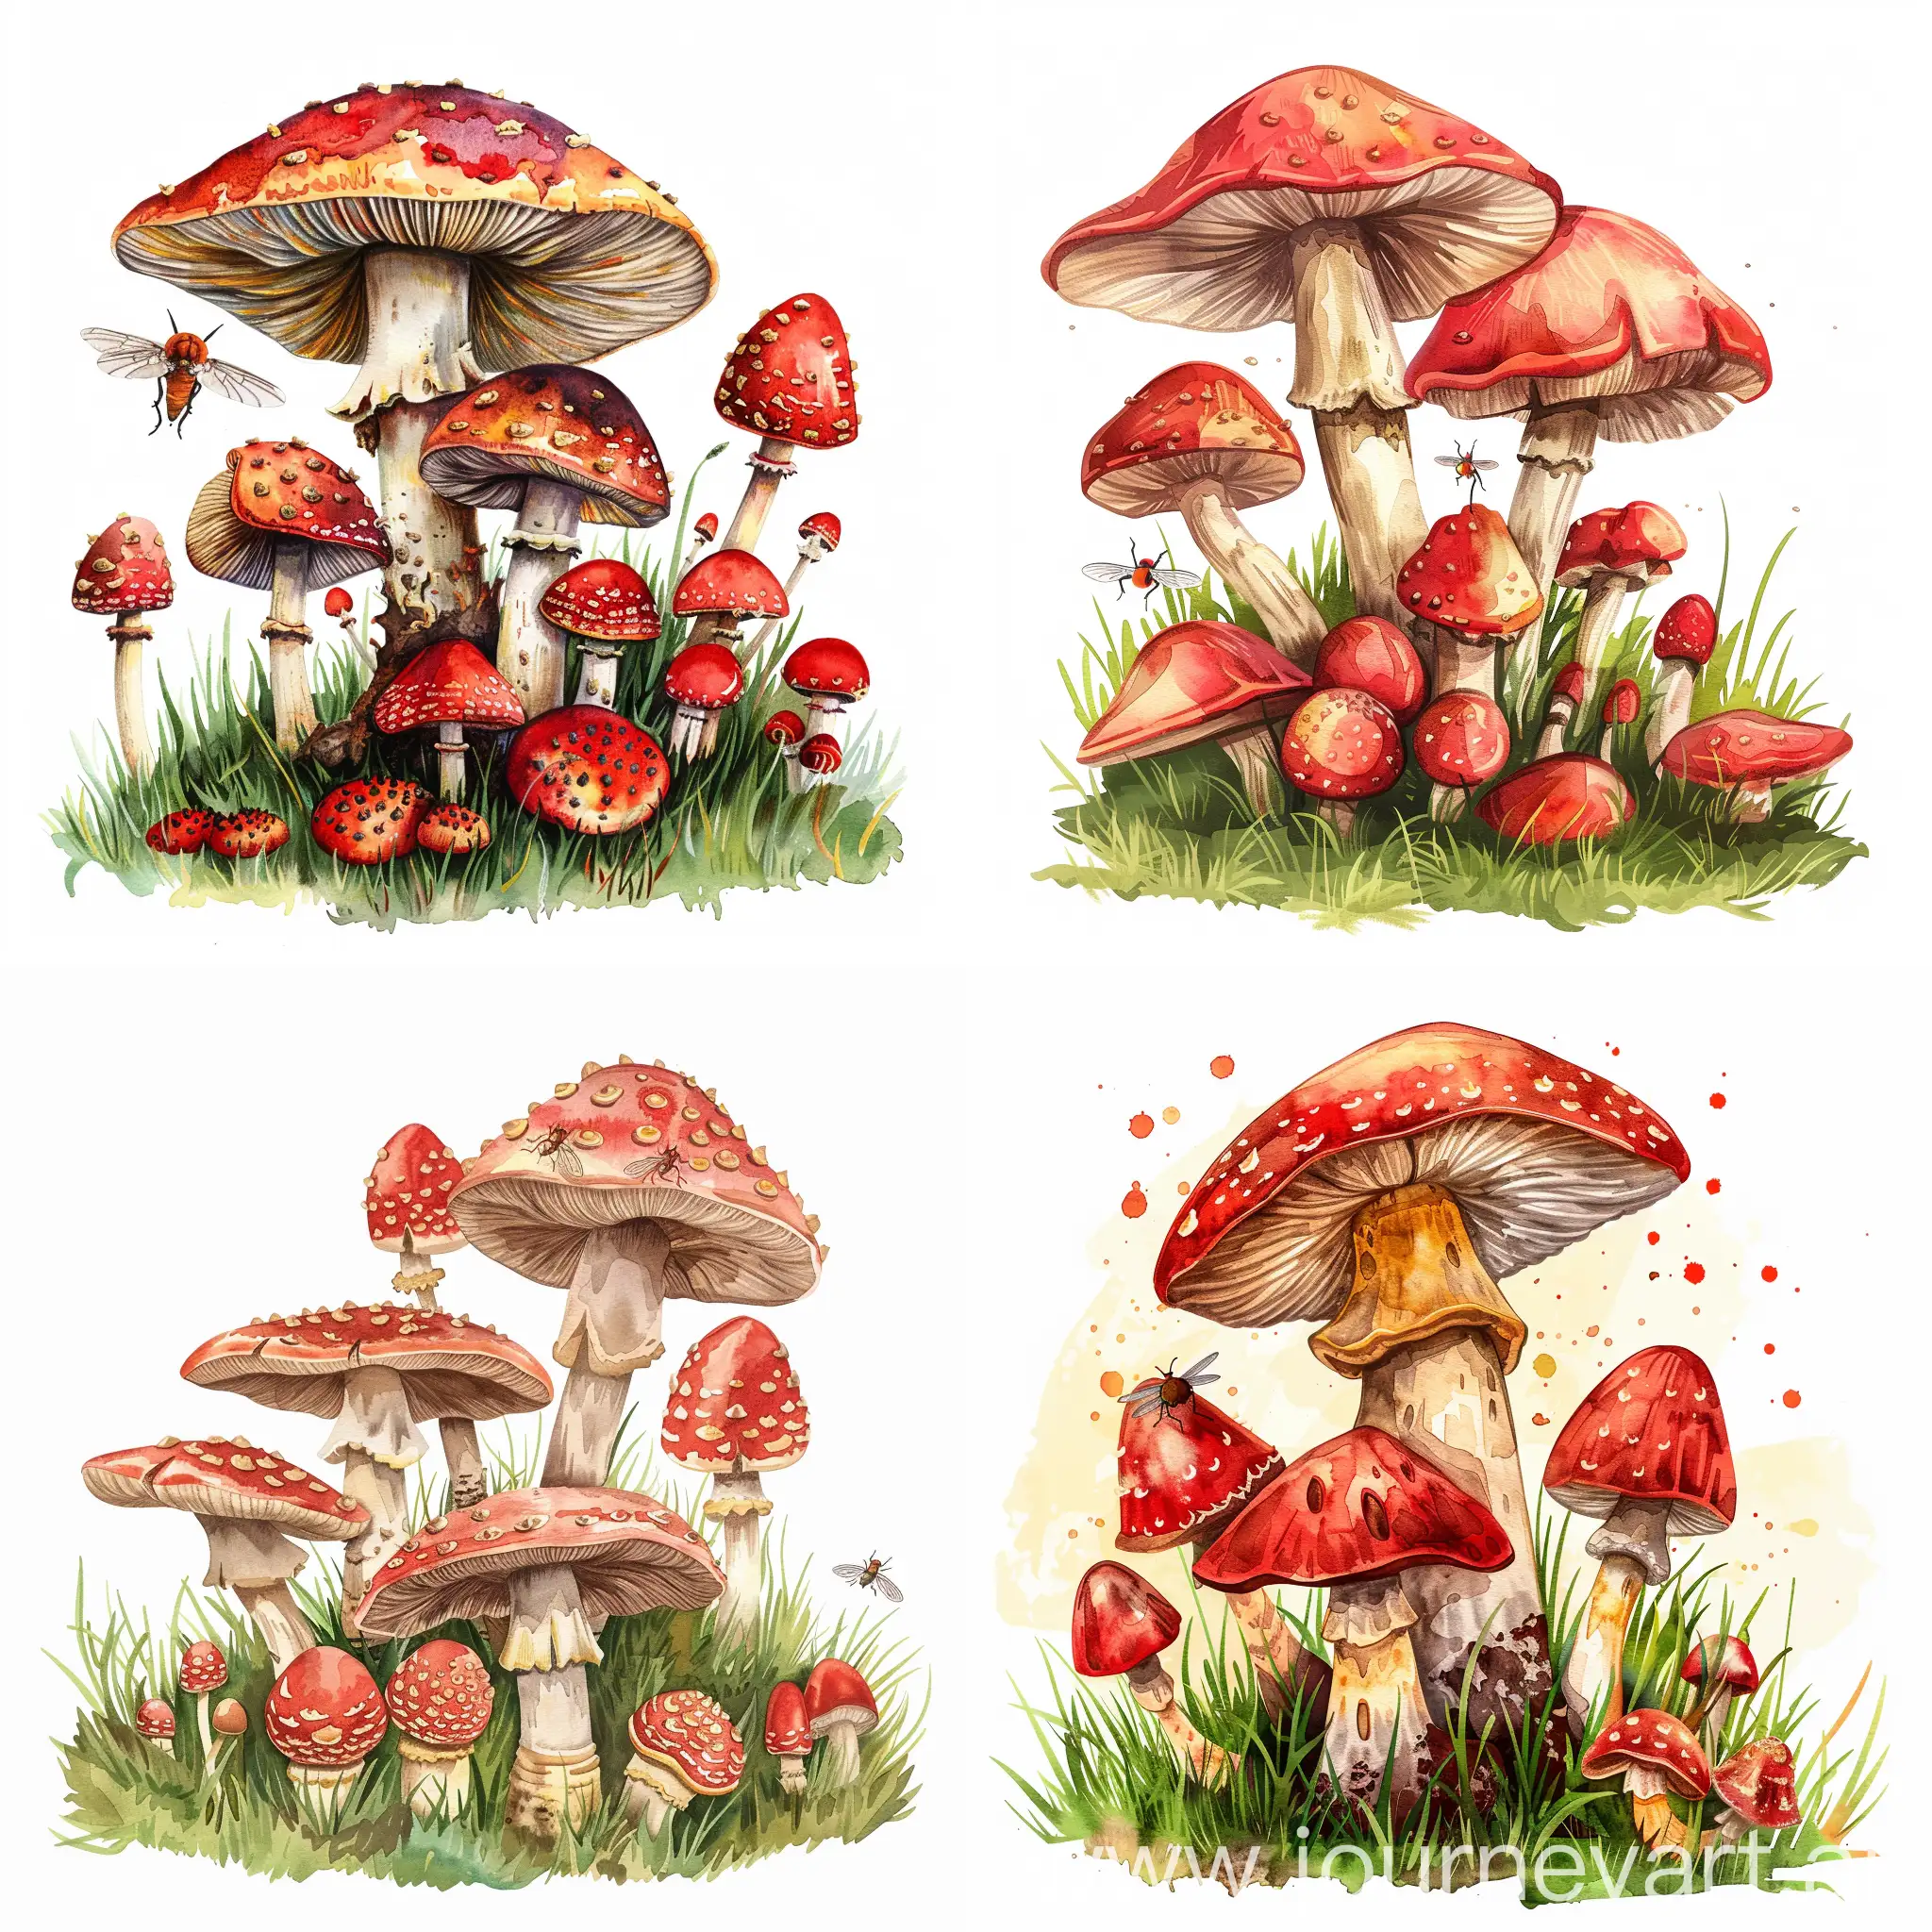 a complete pile of fly agarics on the grass, in high quality details of watercolor cartoon style